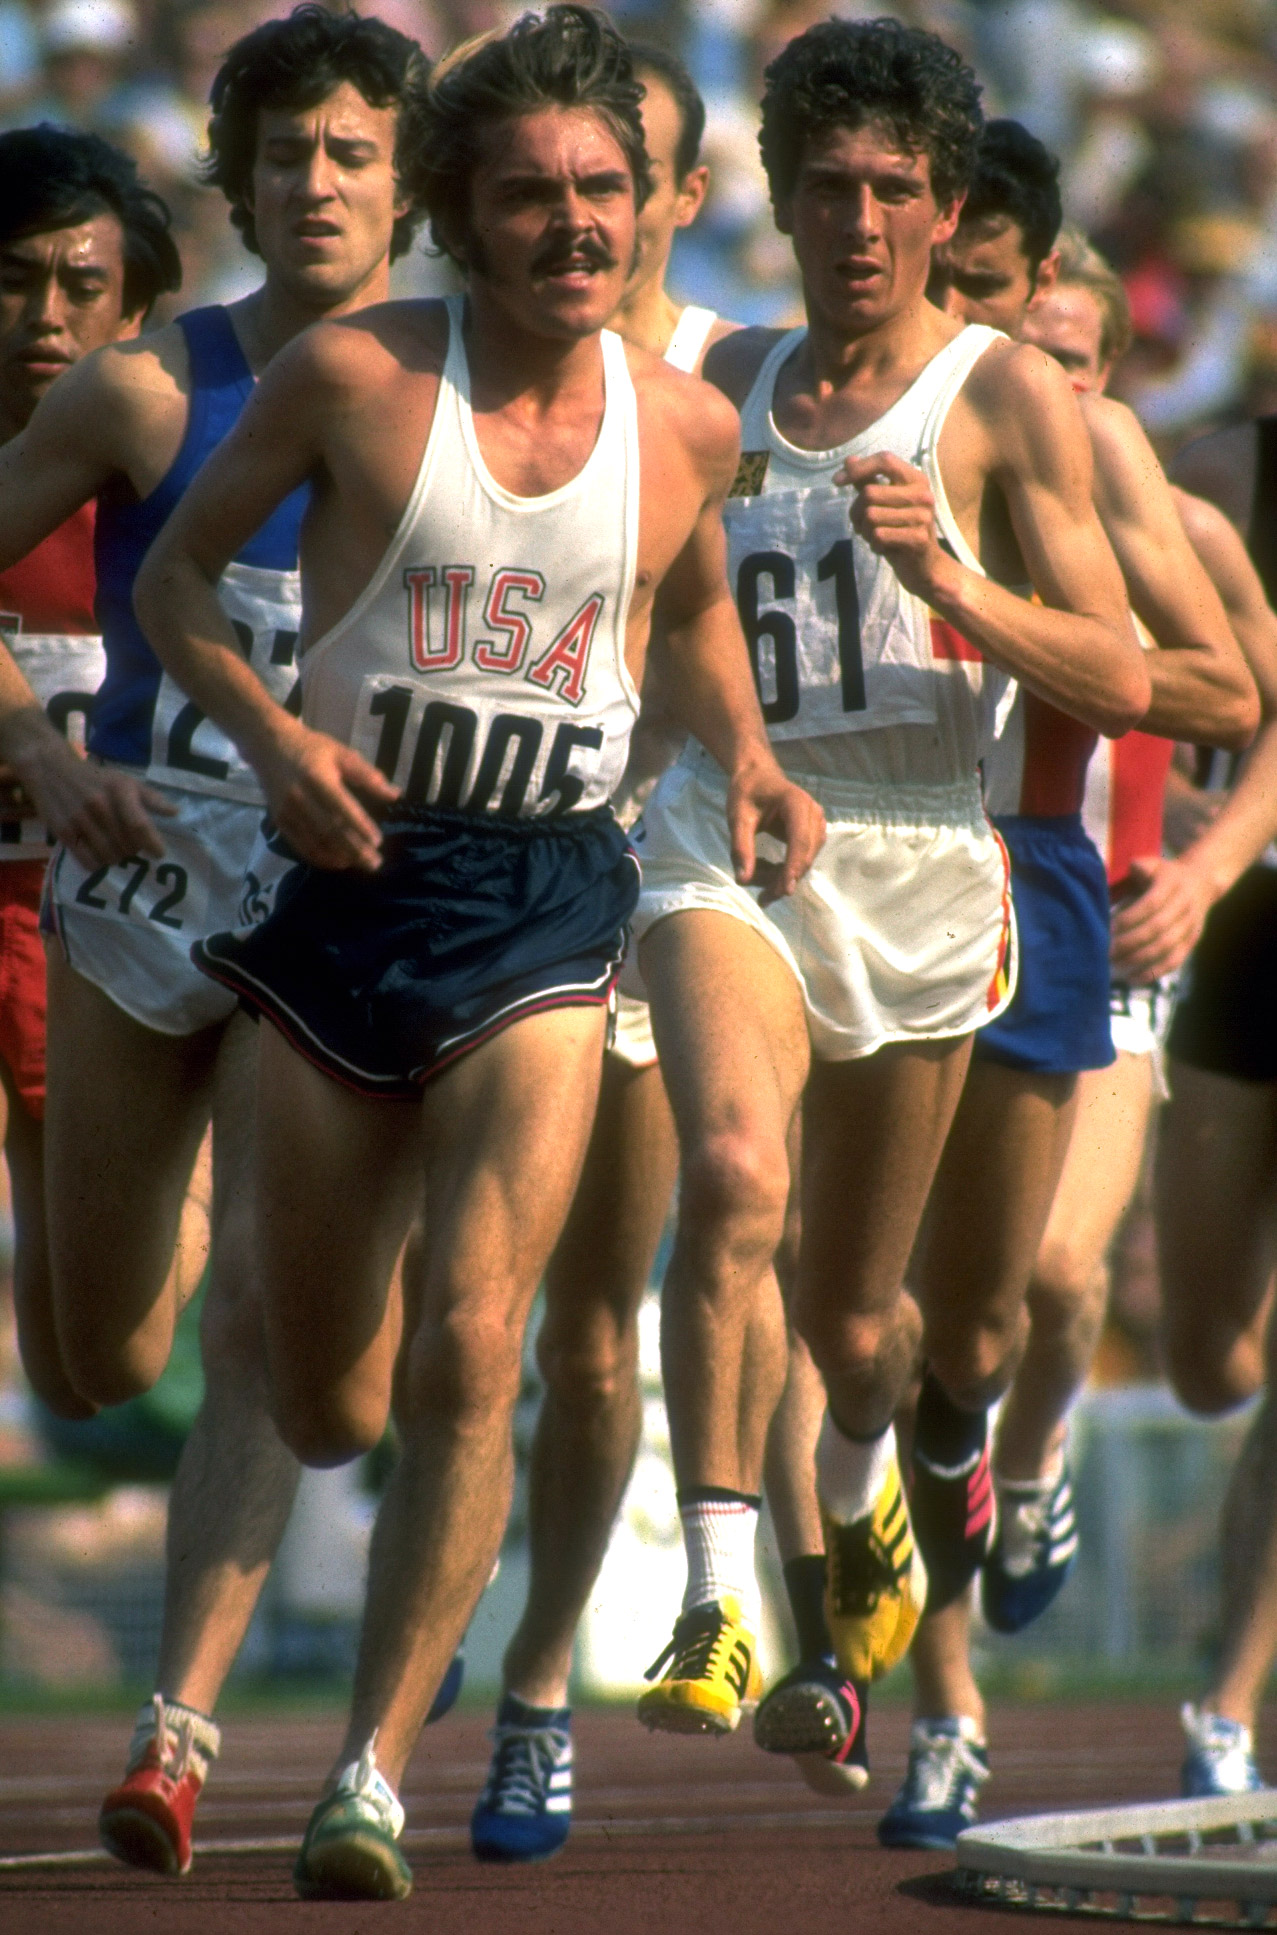 US track athlete Steve Prefontaine running a race at the 1972 summer Olympics in Munich, West Germany.